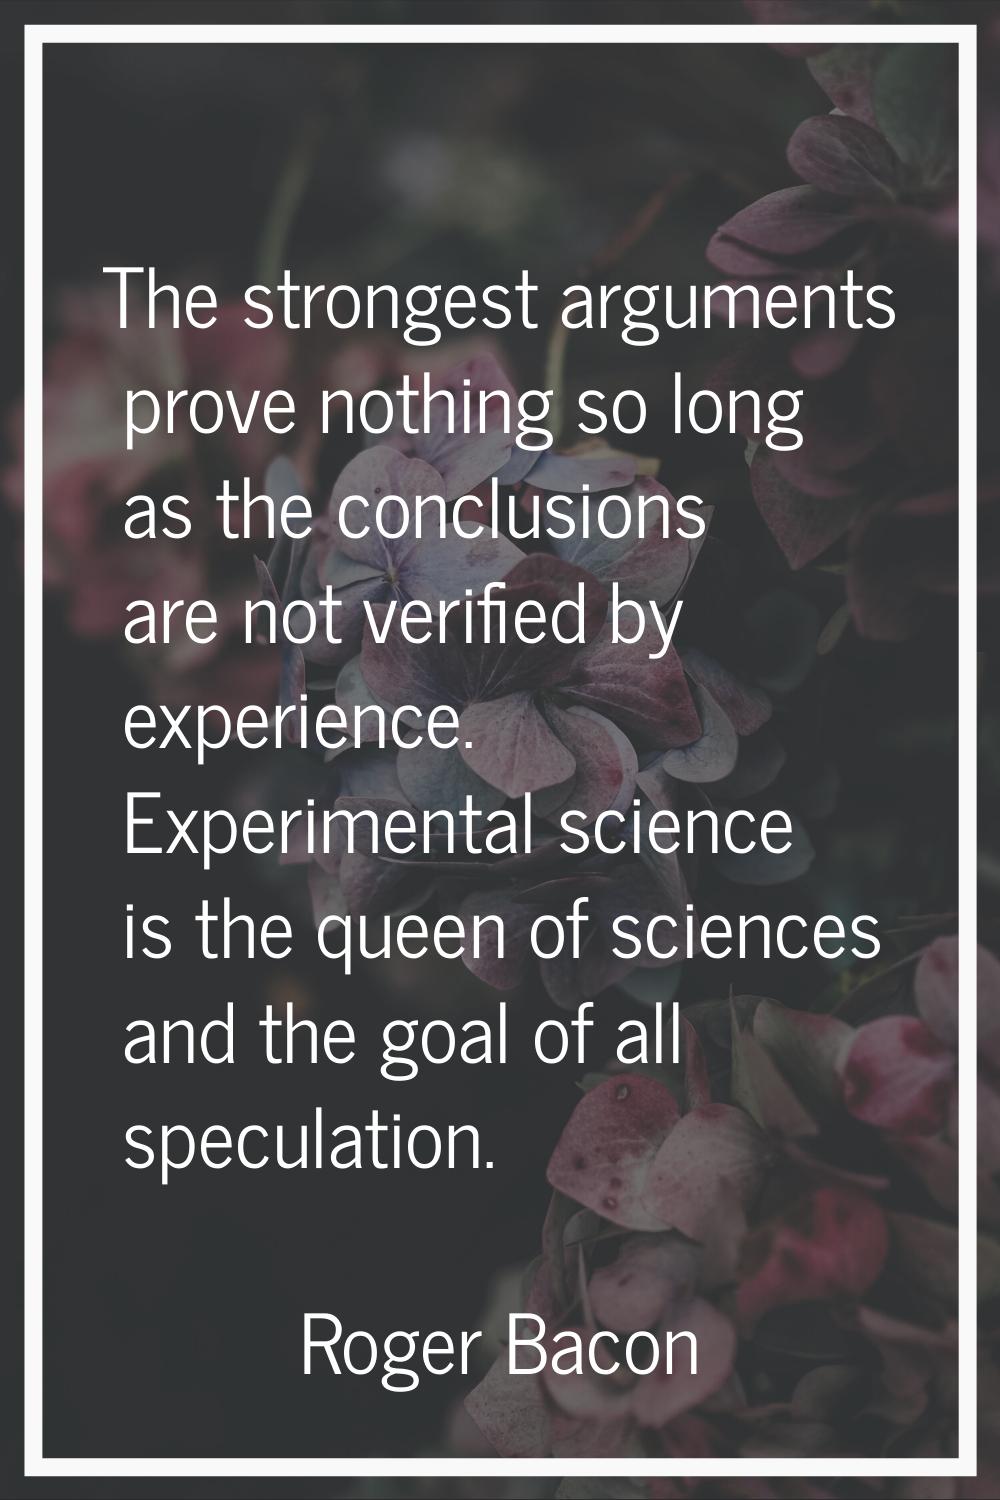 The strongest arguments prove nothing so long as the conclusions are not verified by experience. Ex